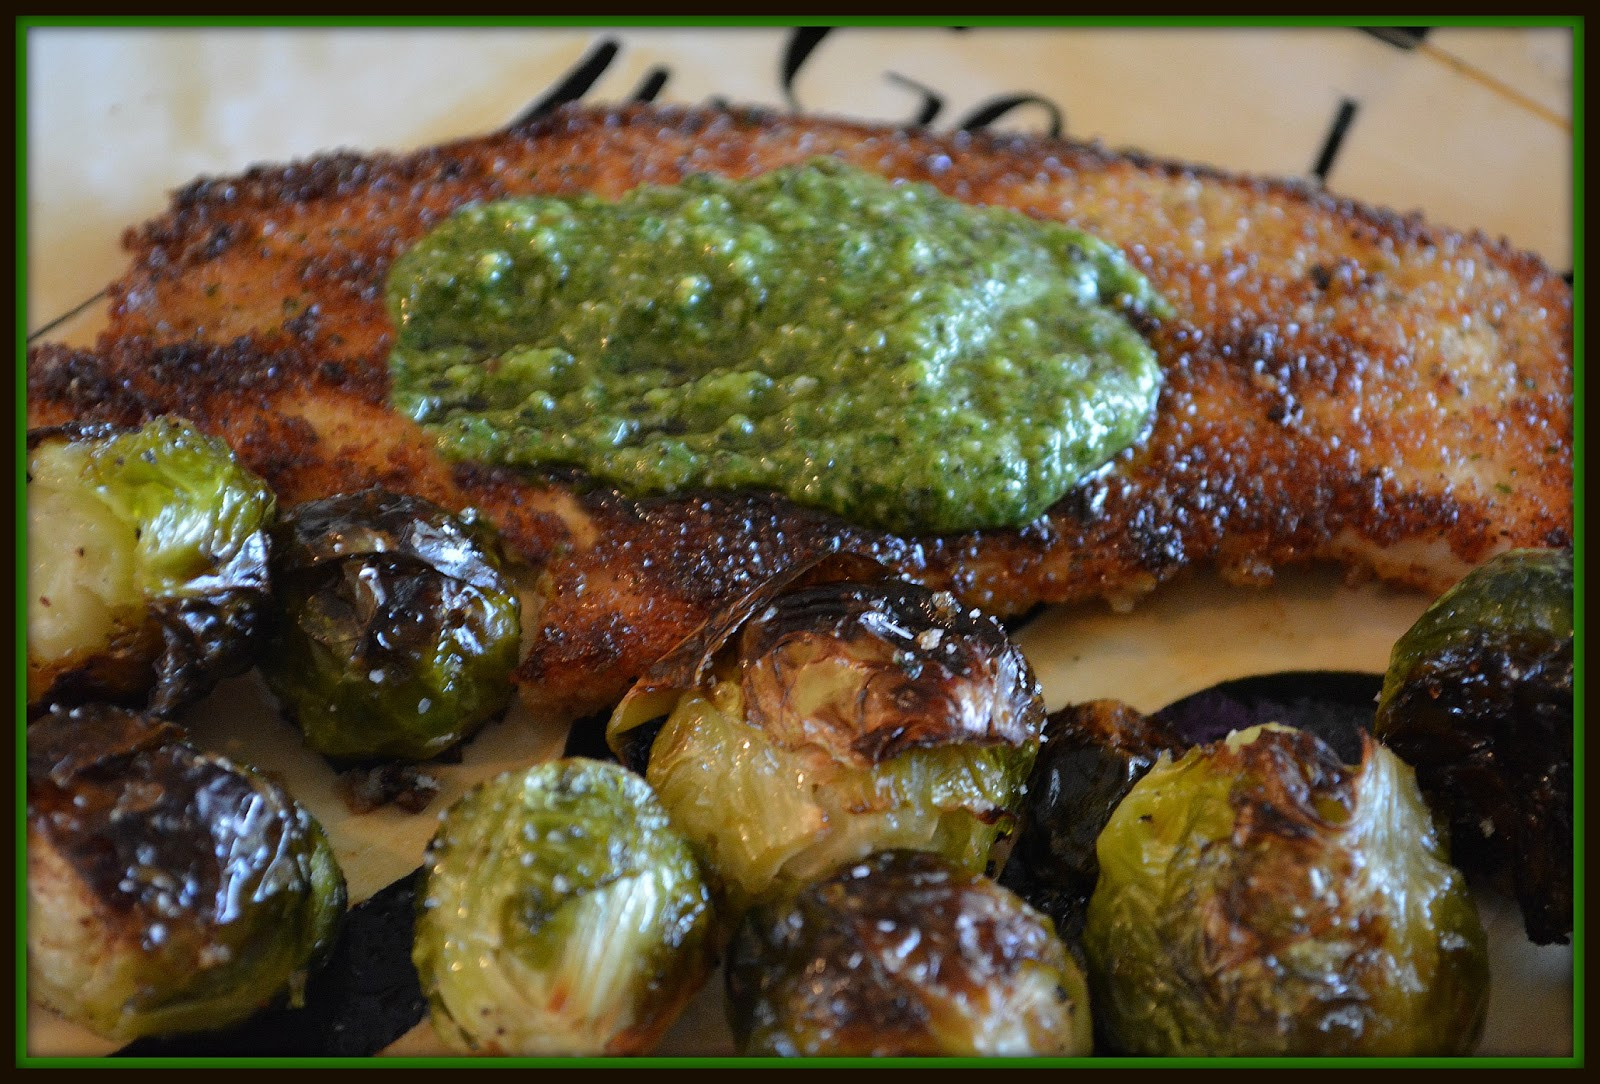 Best Oil For Fried Chicken
 CHICKEN FRIED IN AVOCADO OIL & TOPPED WITH PESTO SERVED